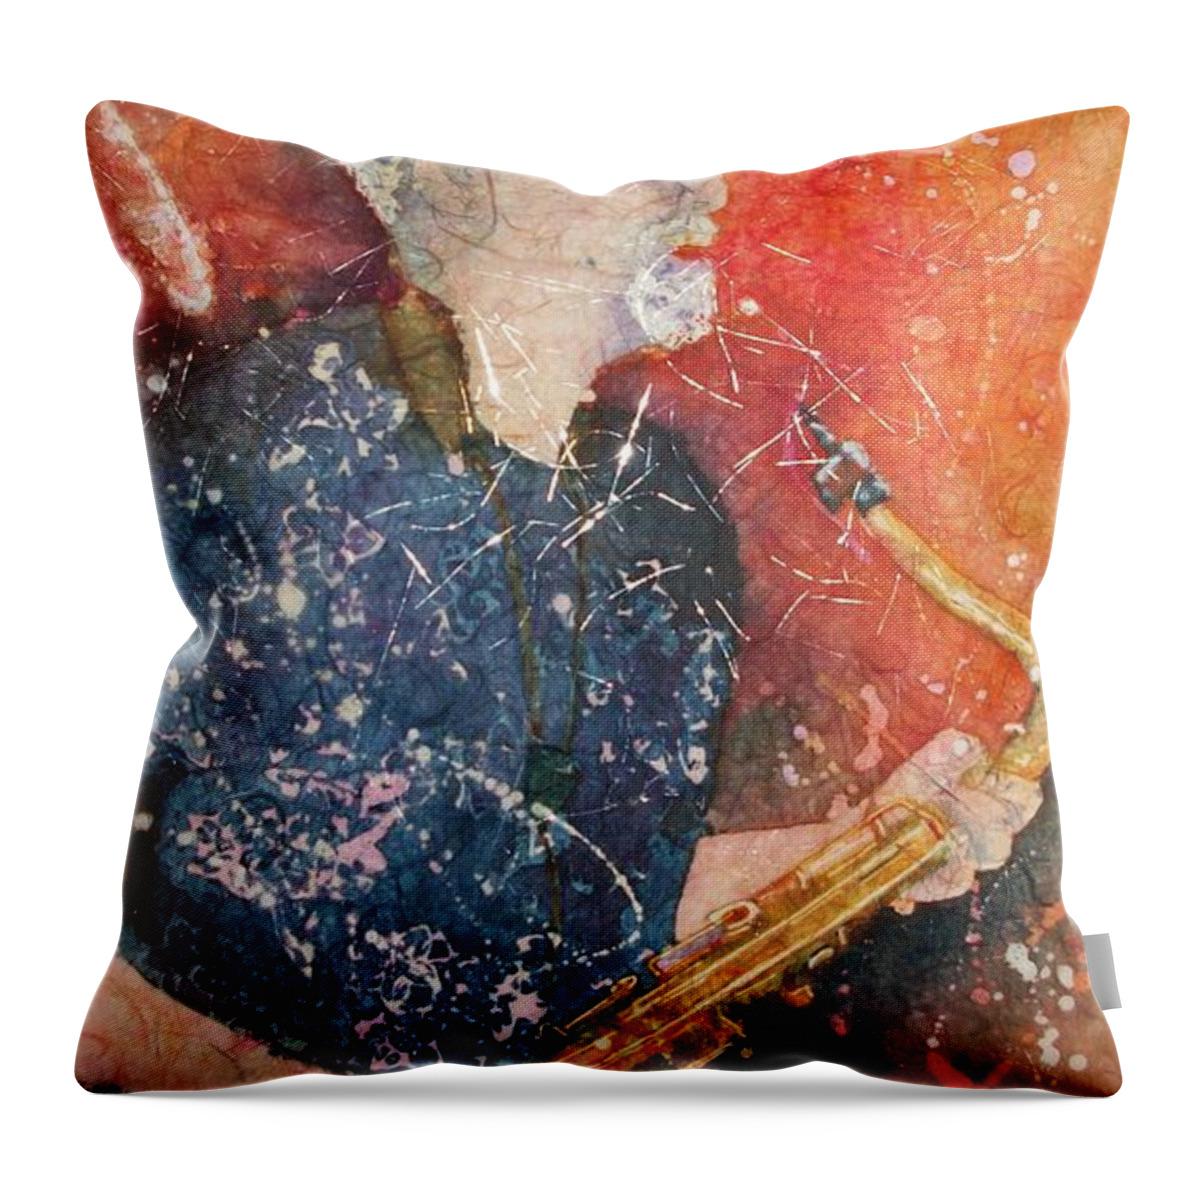 Watercolor Throw Pillow featuring the painting If Rich Played Sax by Carol Losinski Naylor